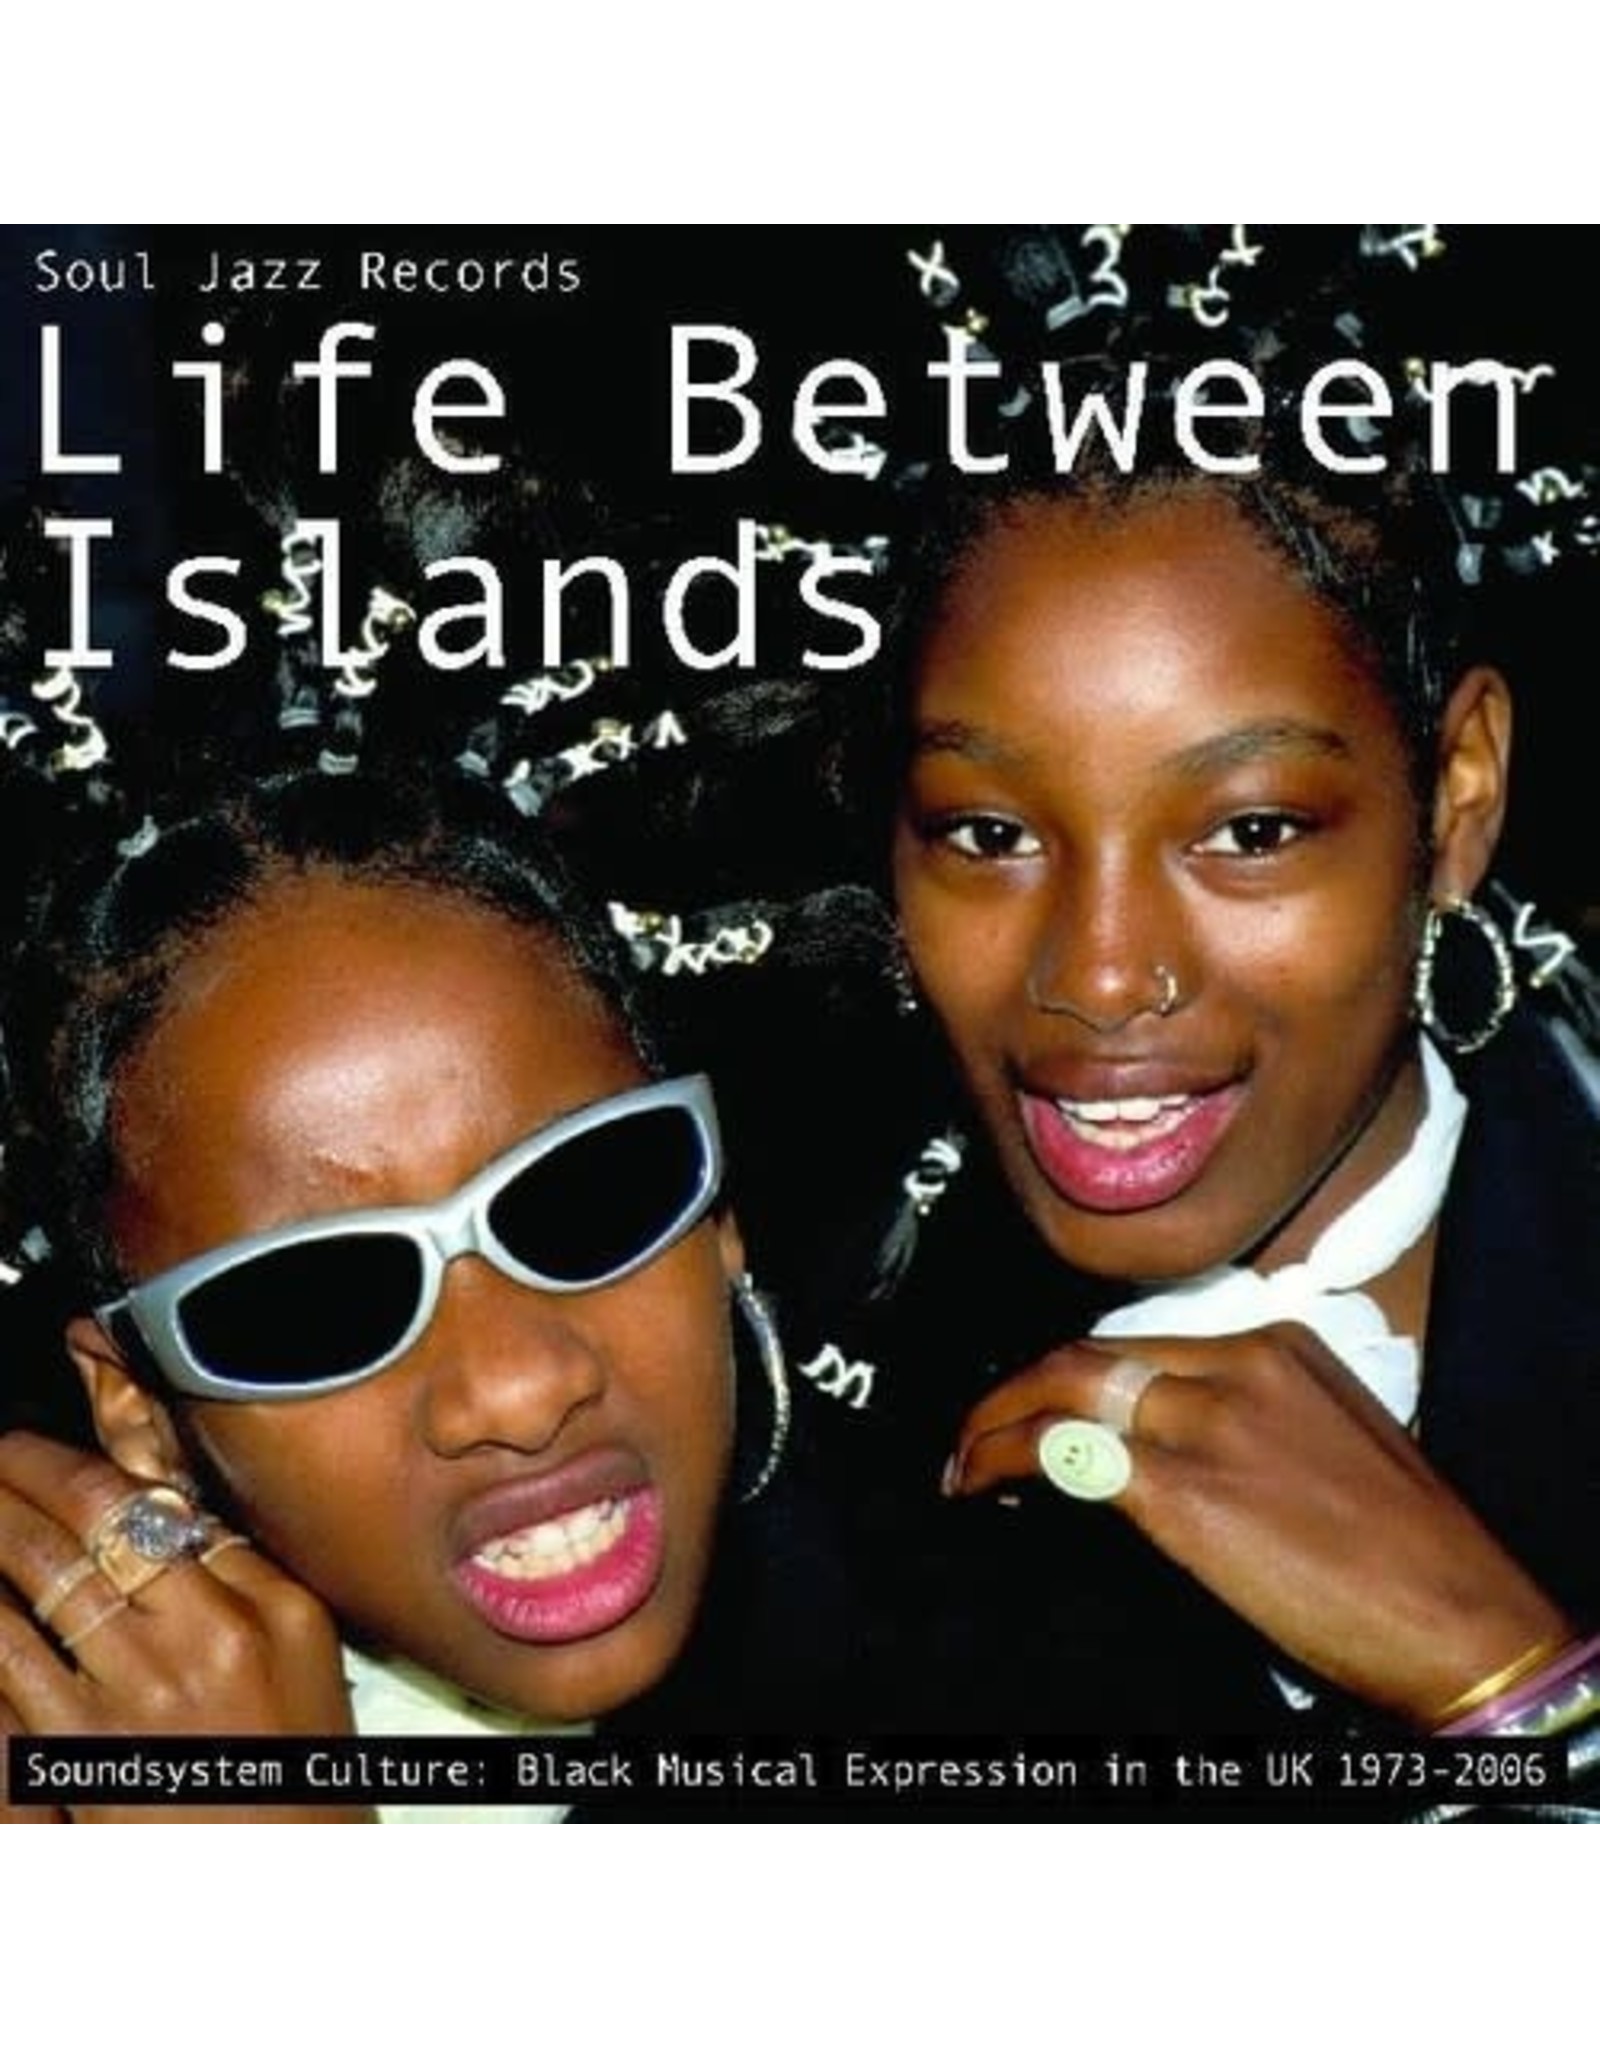 New Vinyl Various - Life Between Islands - Soundsystem Culture: Black Musical Expression in the UK 1973-2006 3LP